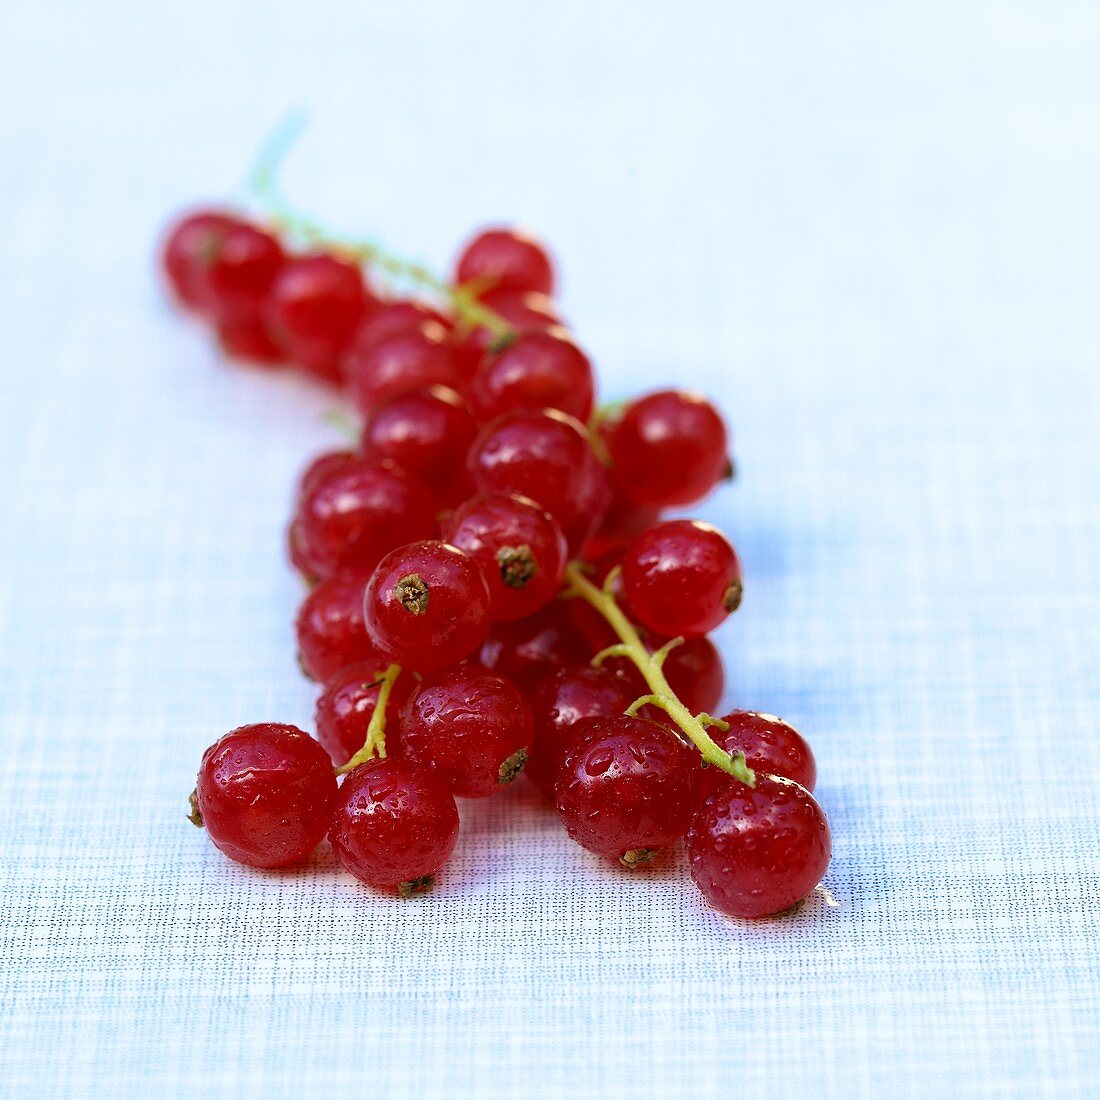 Redcurrants on blue background